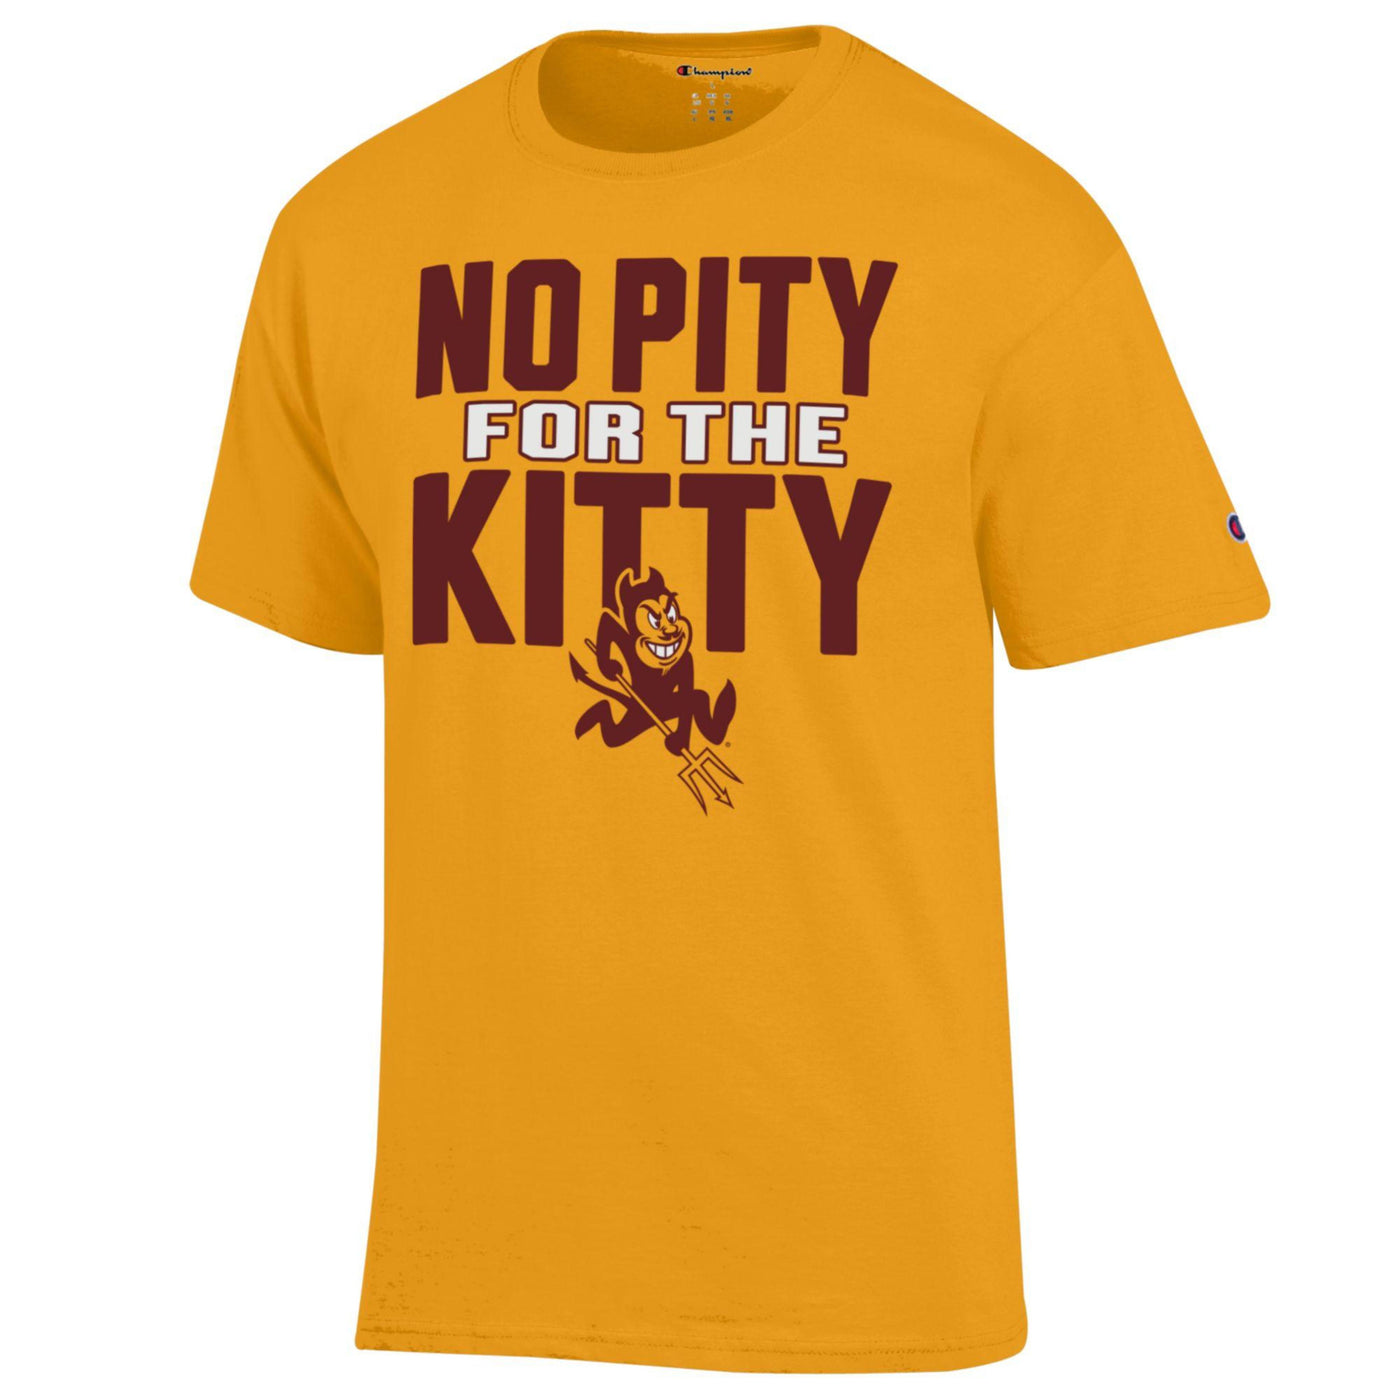 ASU gold tee with the text 